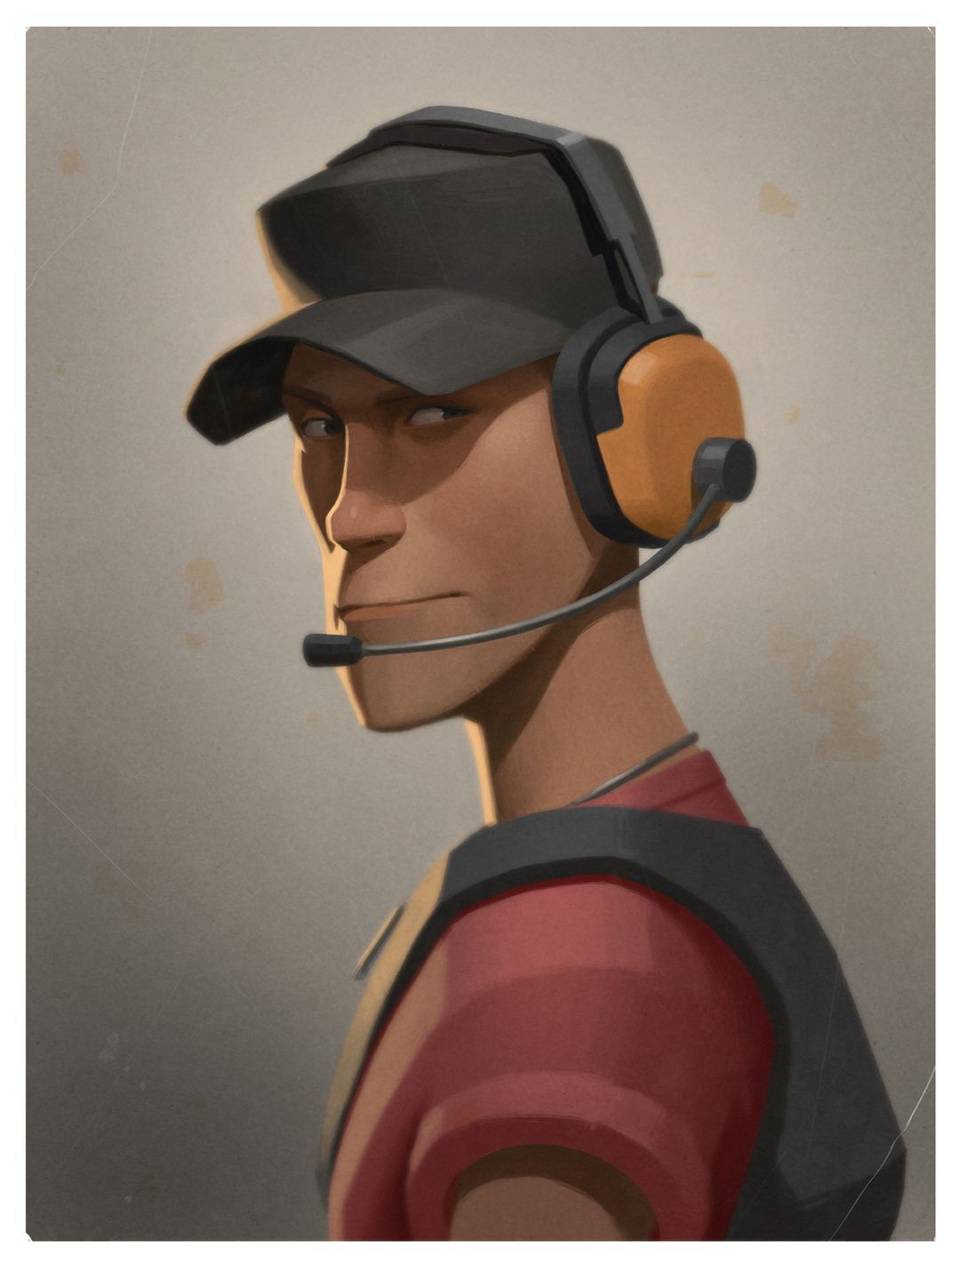 team fortress 2 scout